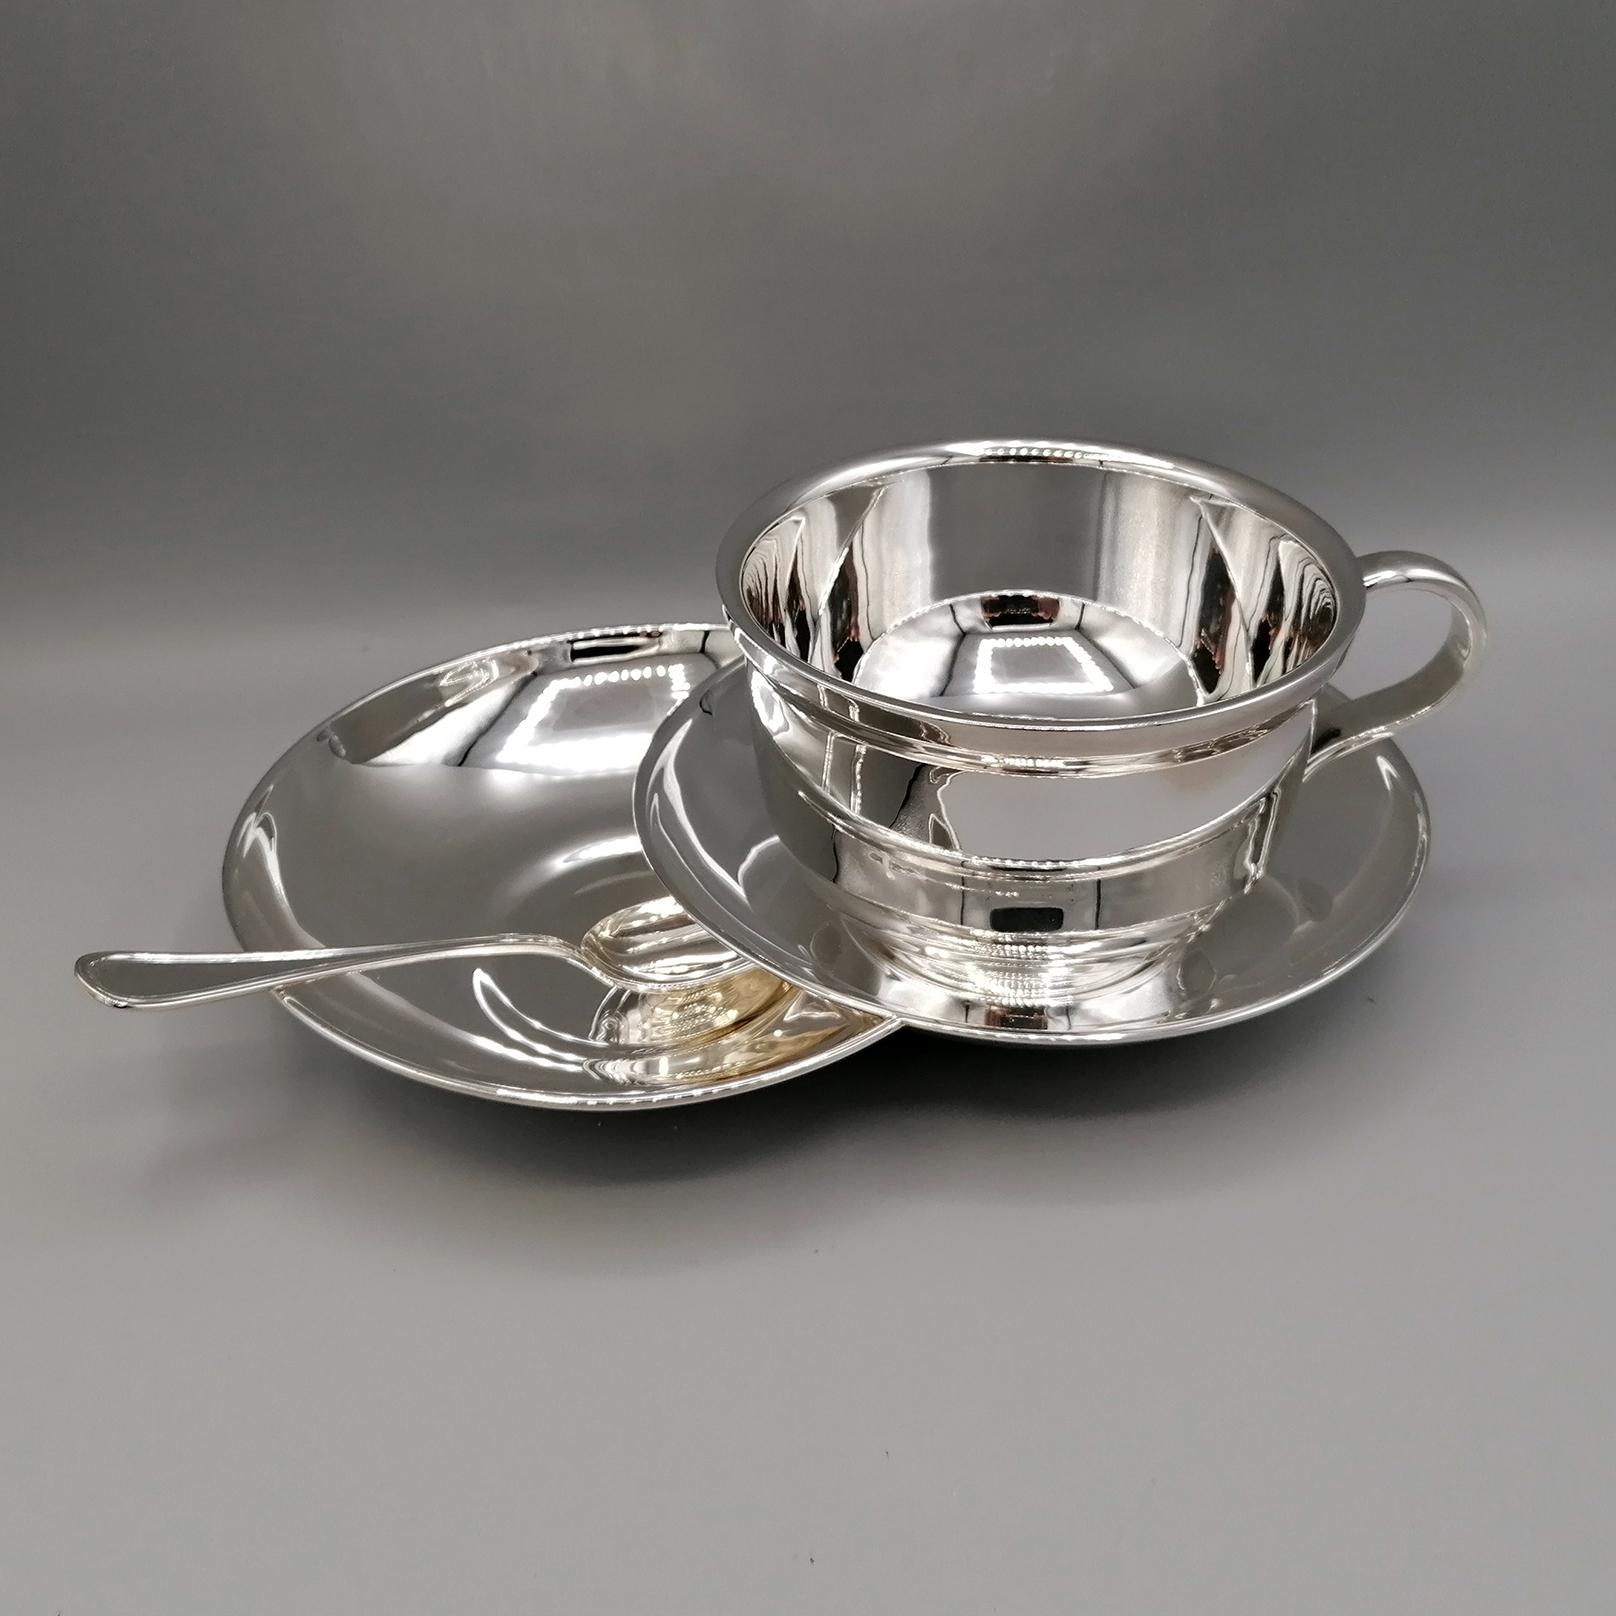 venice mirror cup with a saucer & spoon